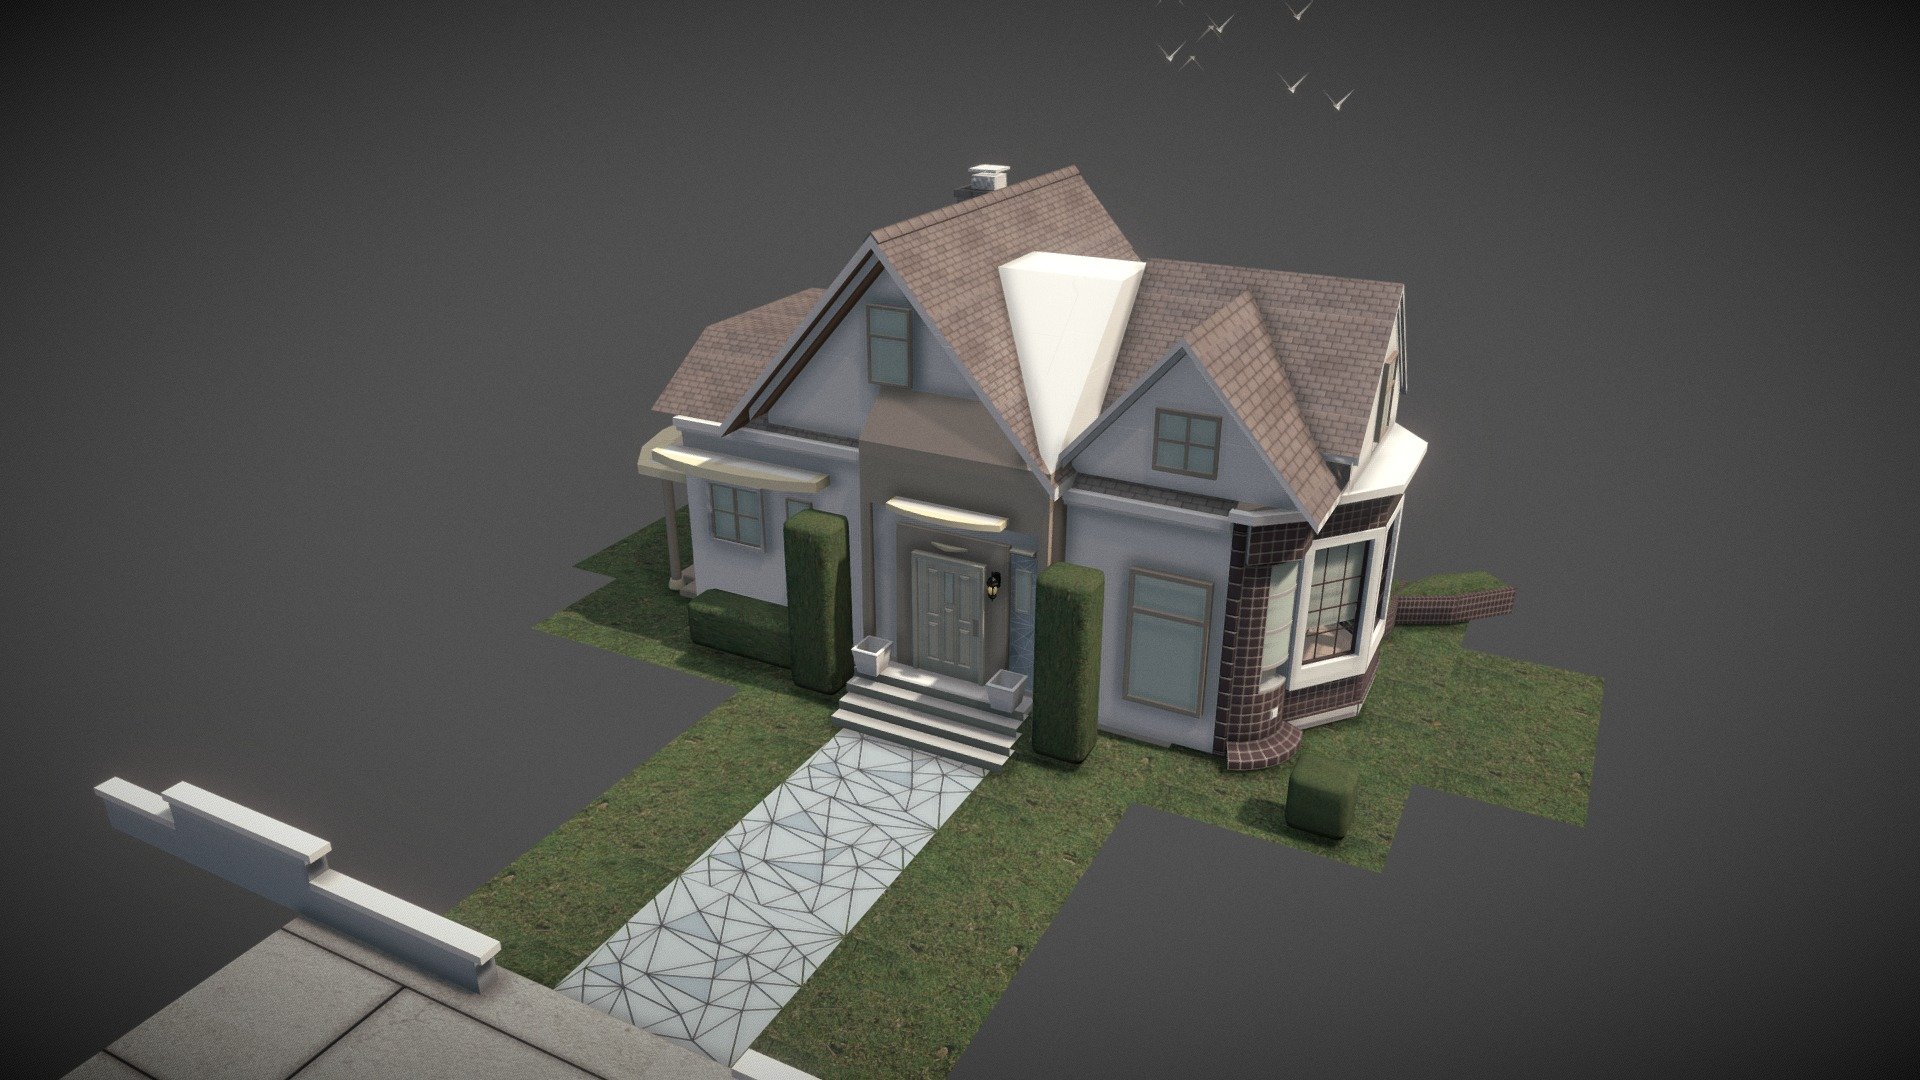 A stylized house facade.

I designed the look myself so there mignt be some inaccuracies in the details compared to a real house 3d model